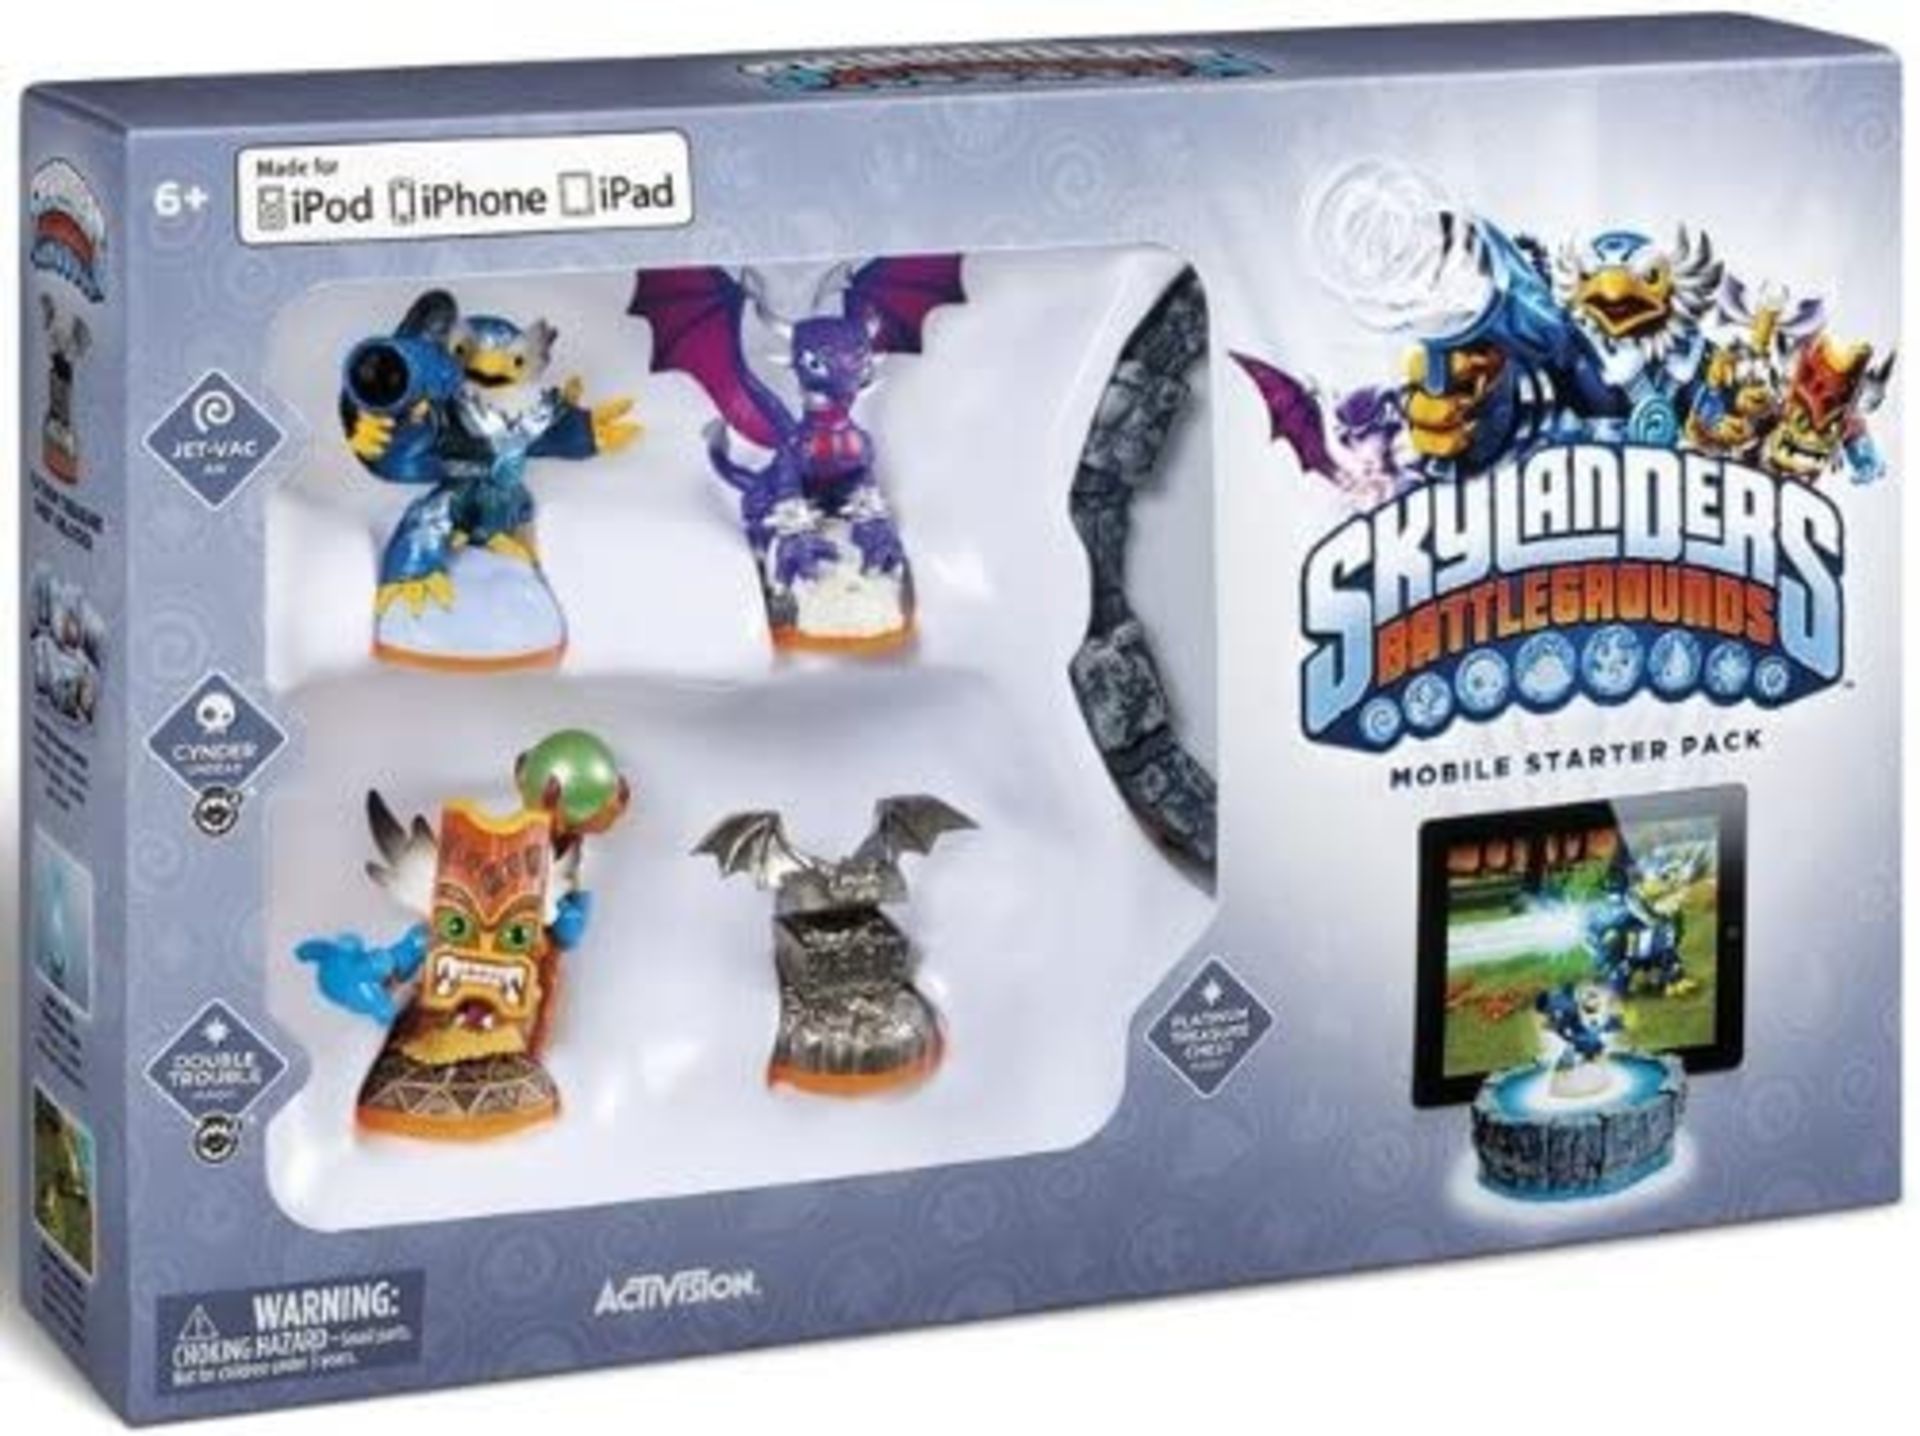 1 x Skylanders Battlegrounds: Starter pack for Apple iPod, iPhone mobile and ipad tablet (Apple iOS)